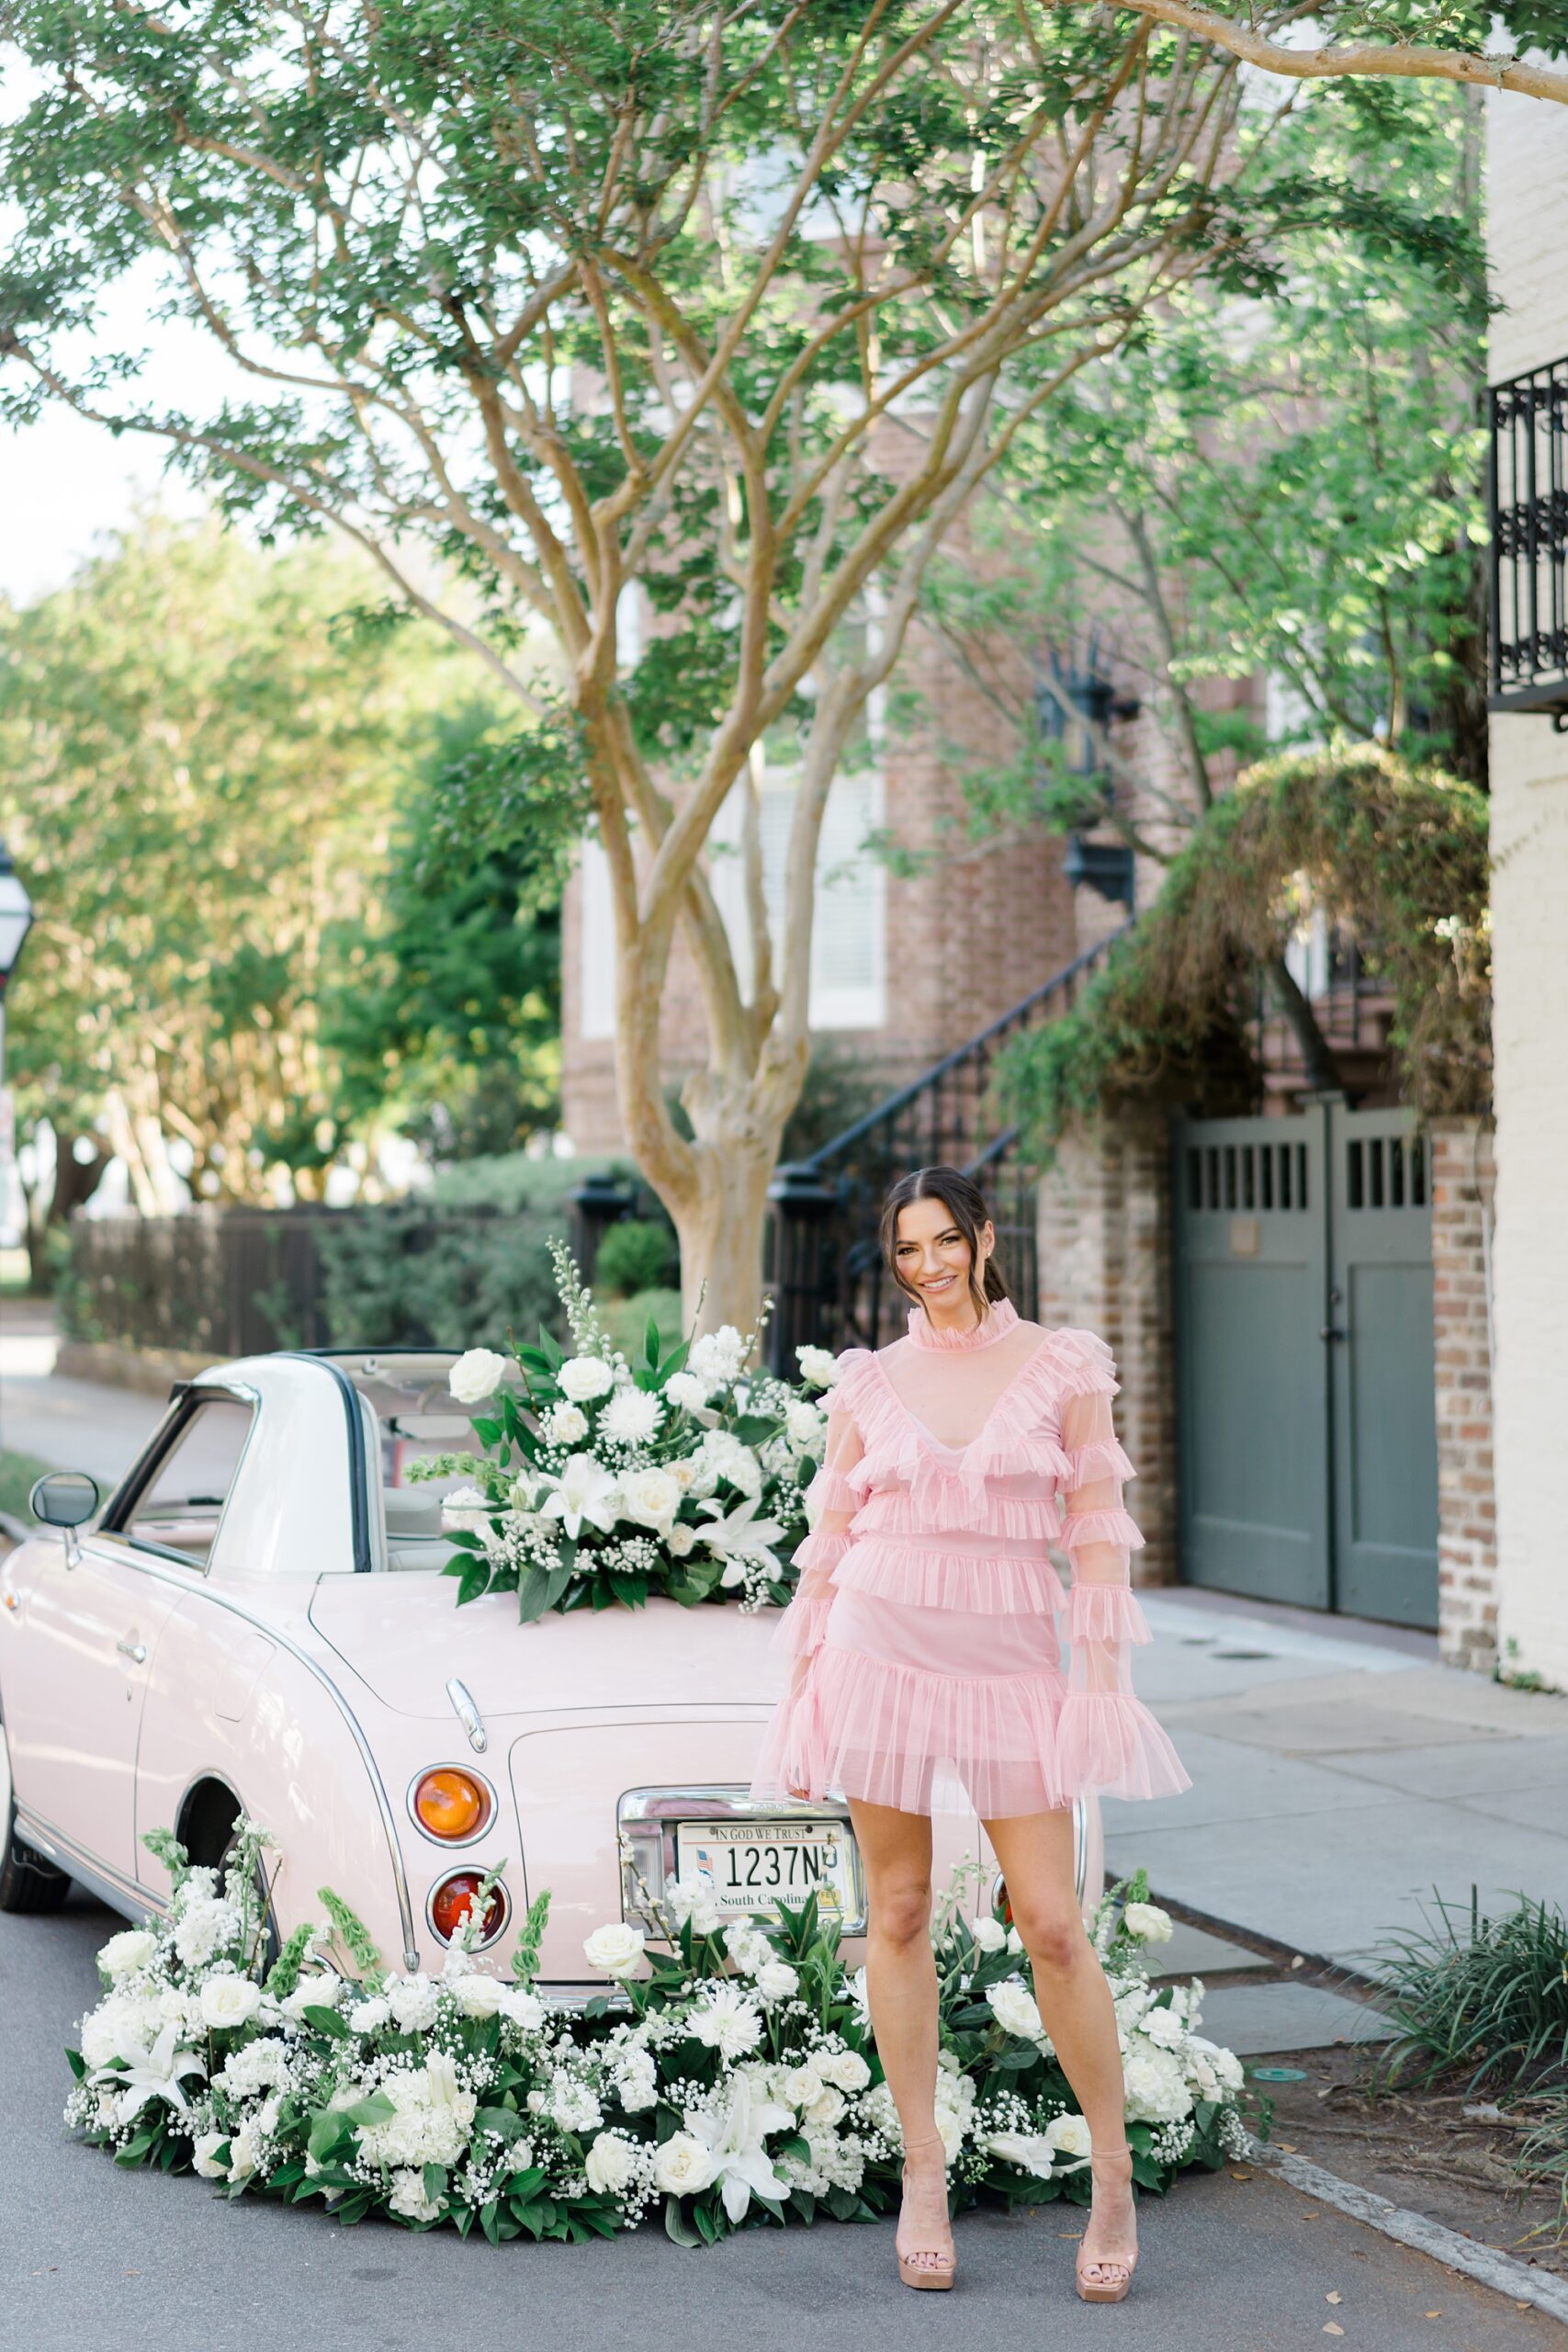 Pink Figgy Charleston Photoshoot with flowers by Firefly weddings and events